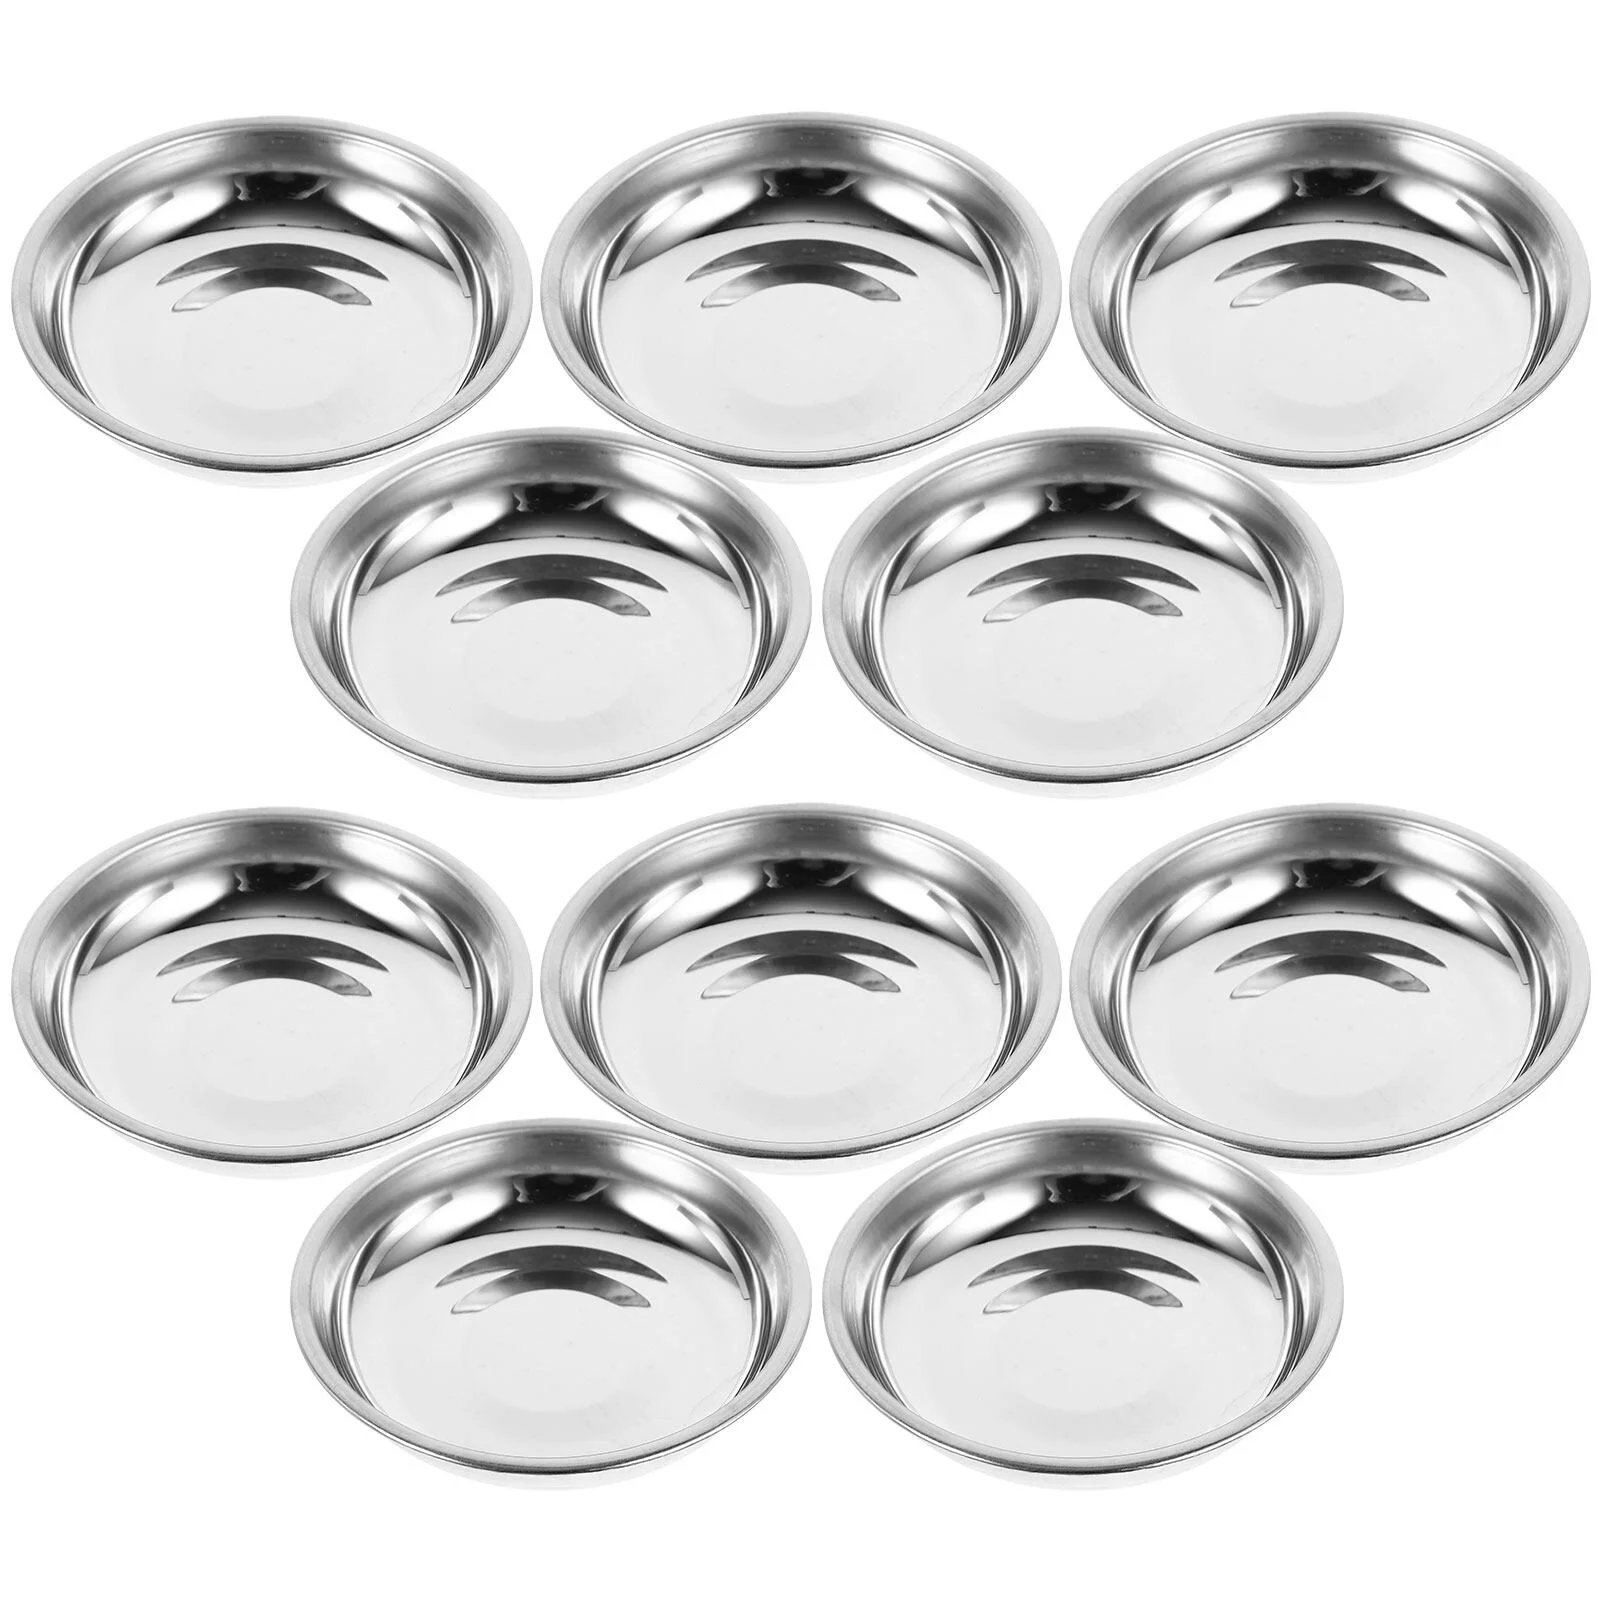 

Fruit Tray Spice Dish Sauce Dishes Stainless Steel Dessert Appetizer Serving Plate